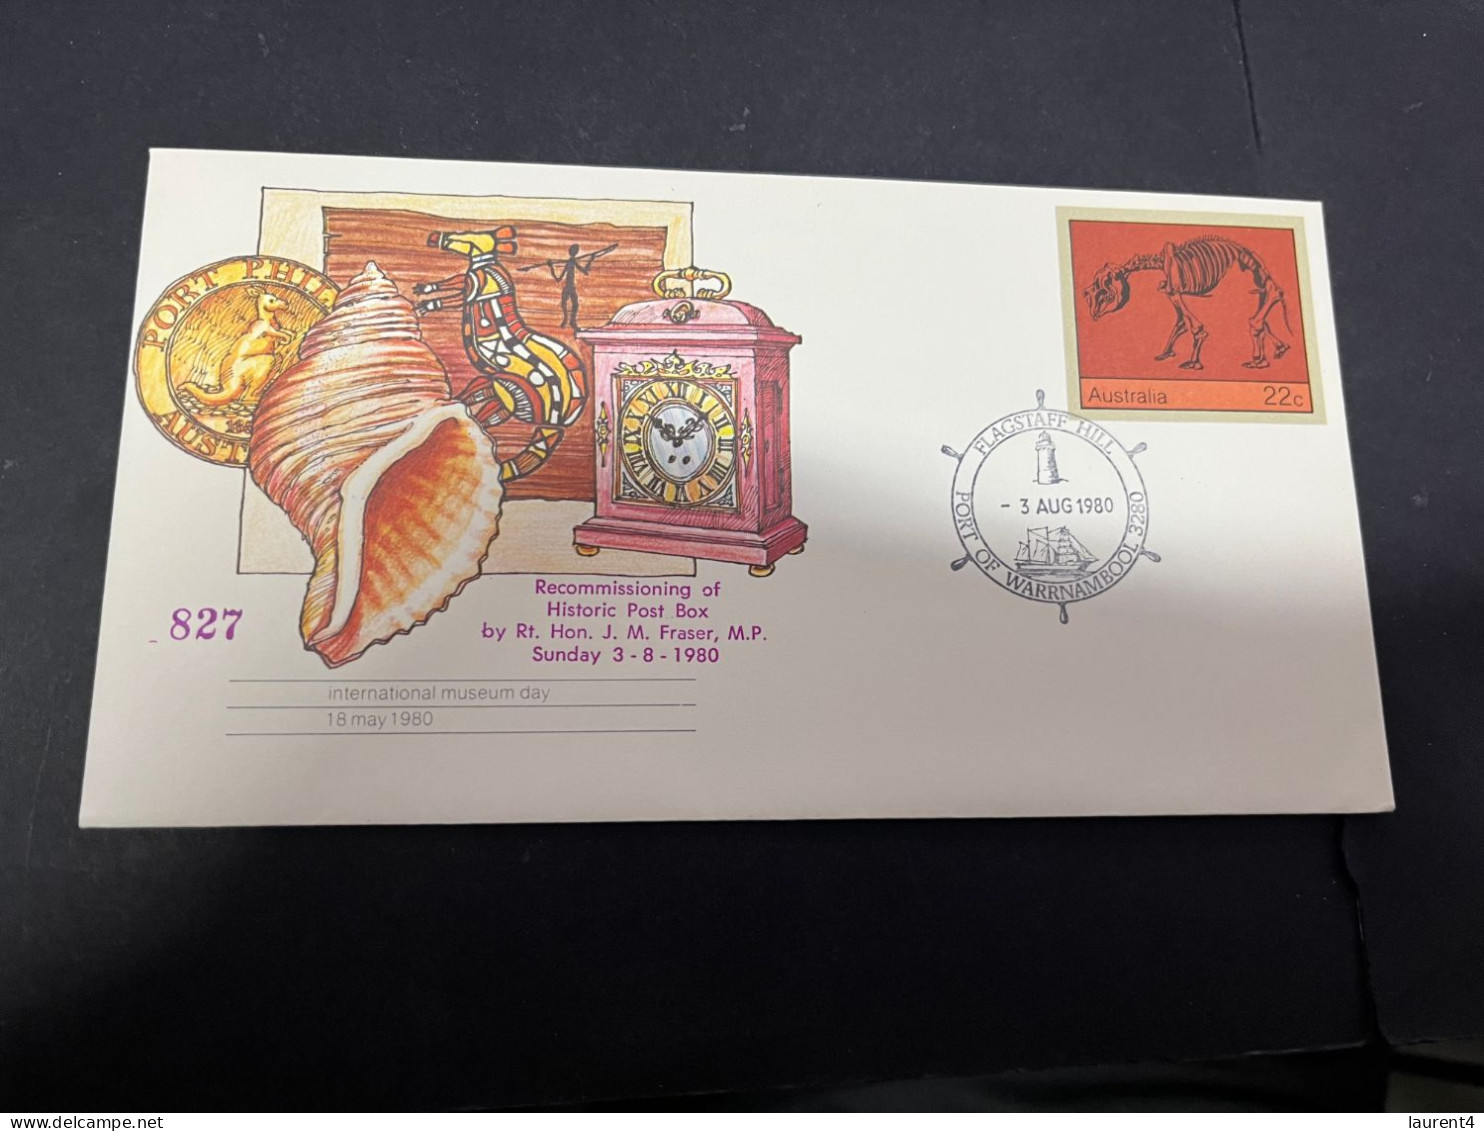 17-4-2024 (2 X 19) Australia - 1980 - Seashell Cover - With Lighthouse Postmark - Primo Giorno D'emissione (FDC)